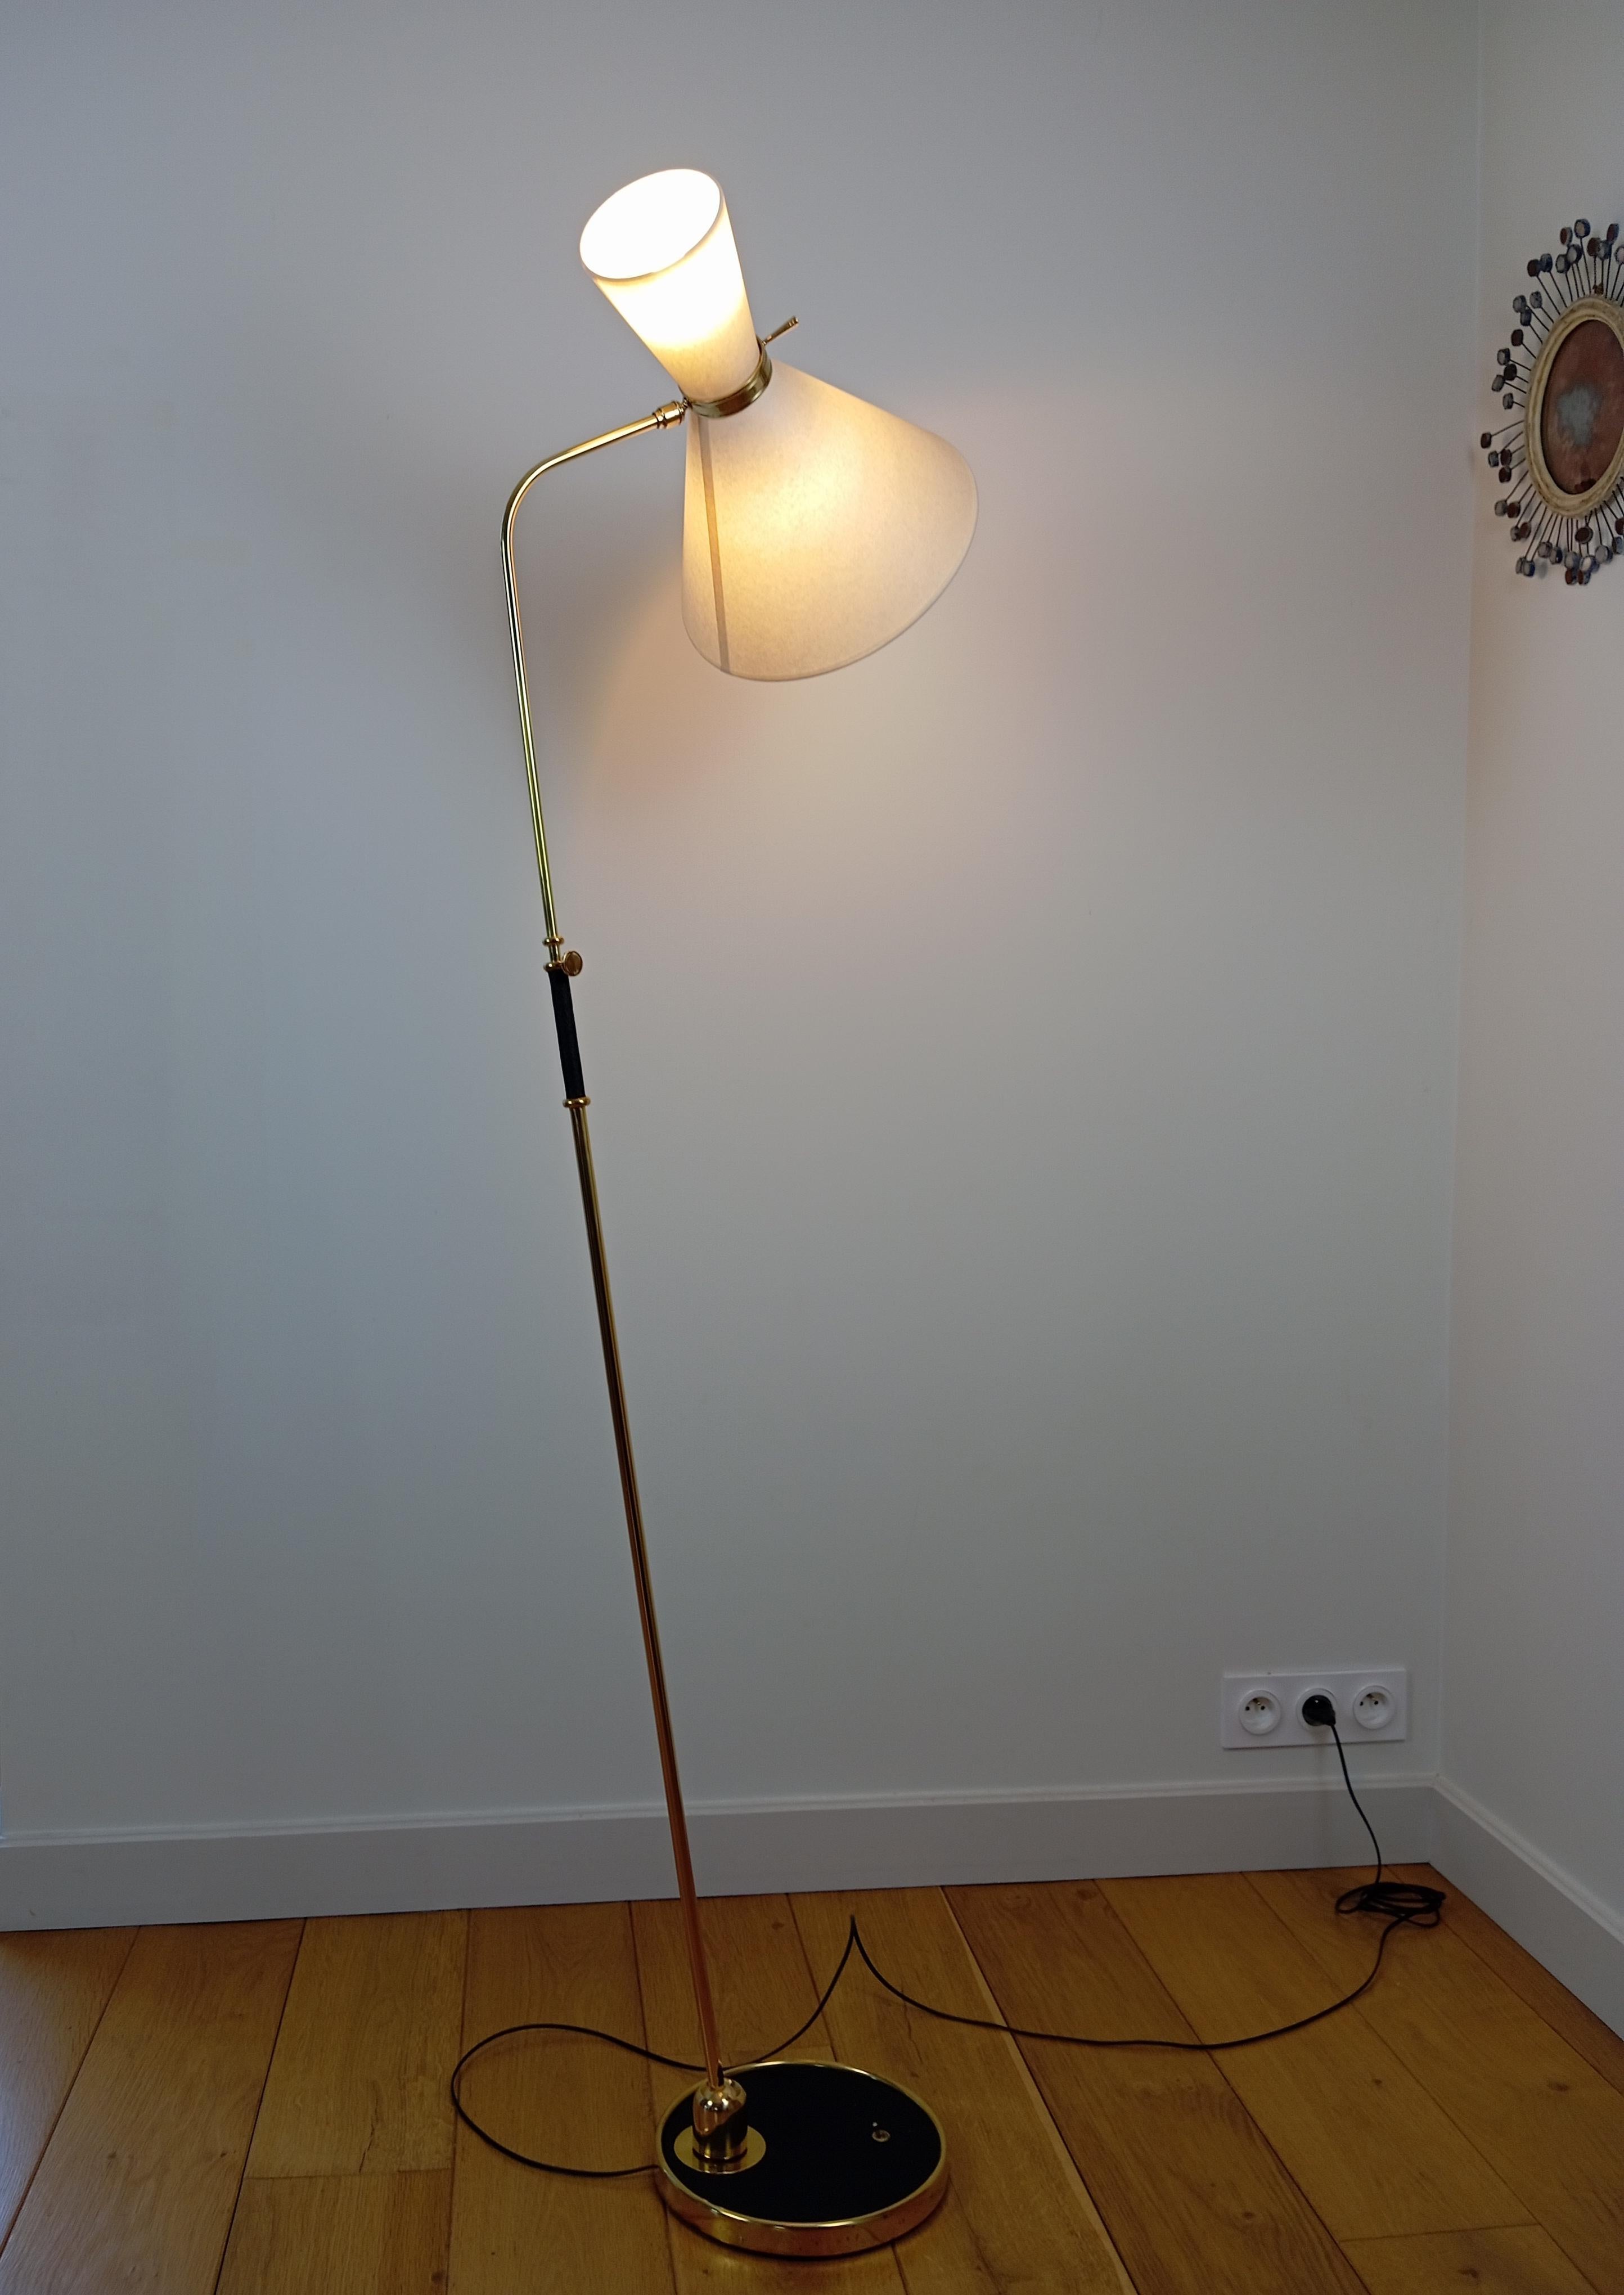  fFoor lamps,
composed of a circular base in cast iron sheathed in black leather, and set with a brass ring.
Brass arm with adjustable height, and orientable by a brass ball joint on the base of the foot.
Lighting by 2 conical shades, installed on a